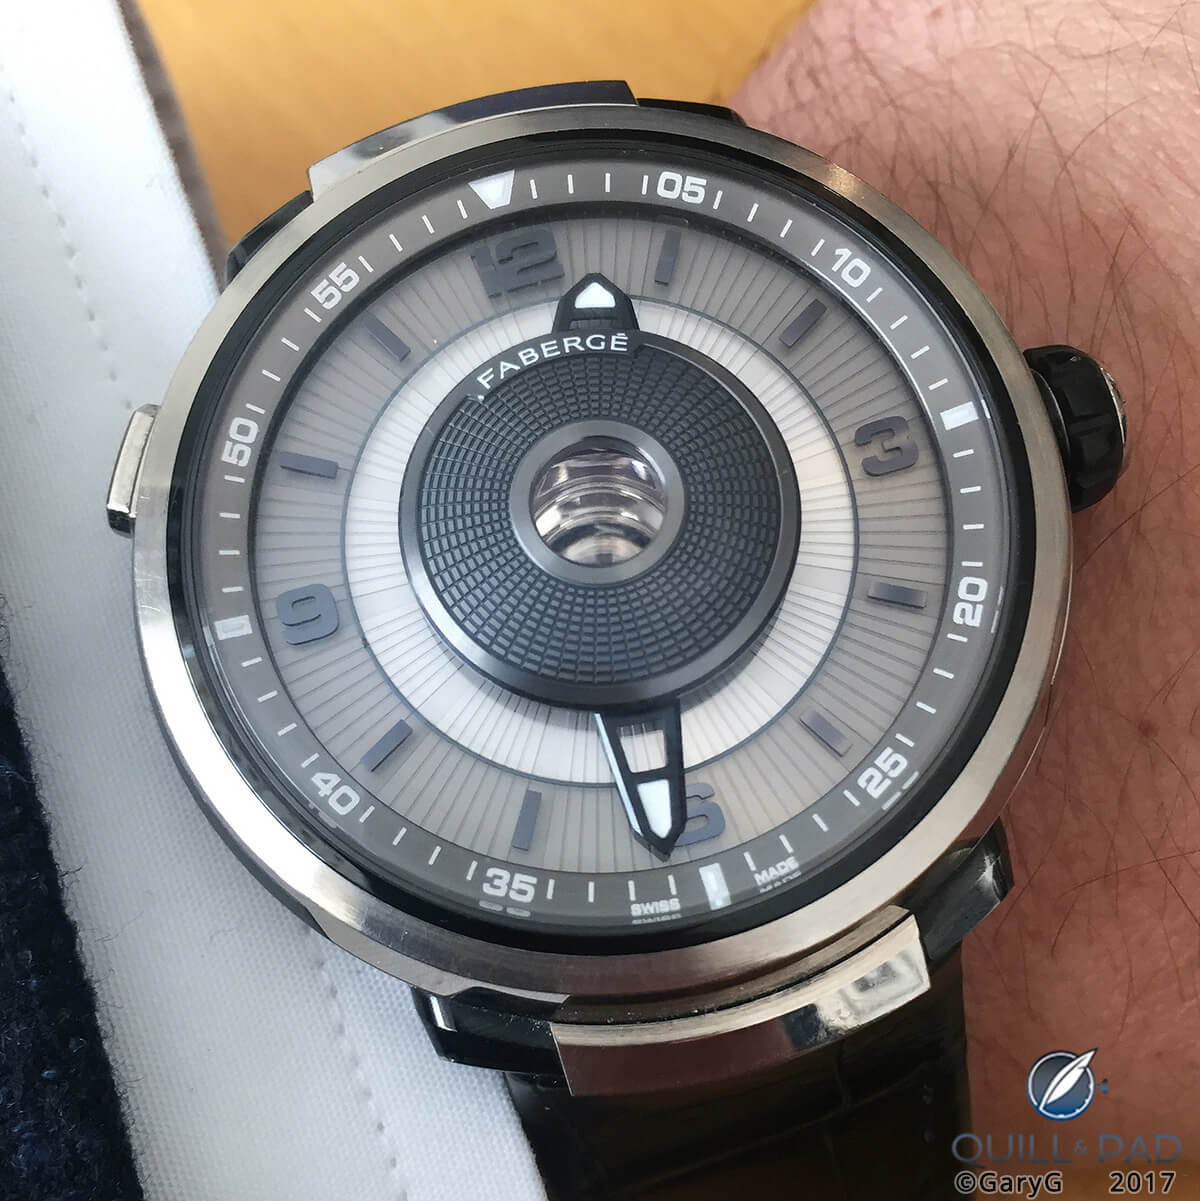 On the wrist: Fabergé Visionnaire DTZ with central indication of second time zone